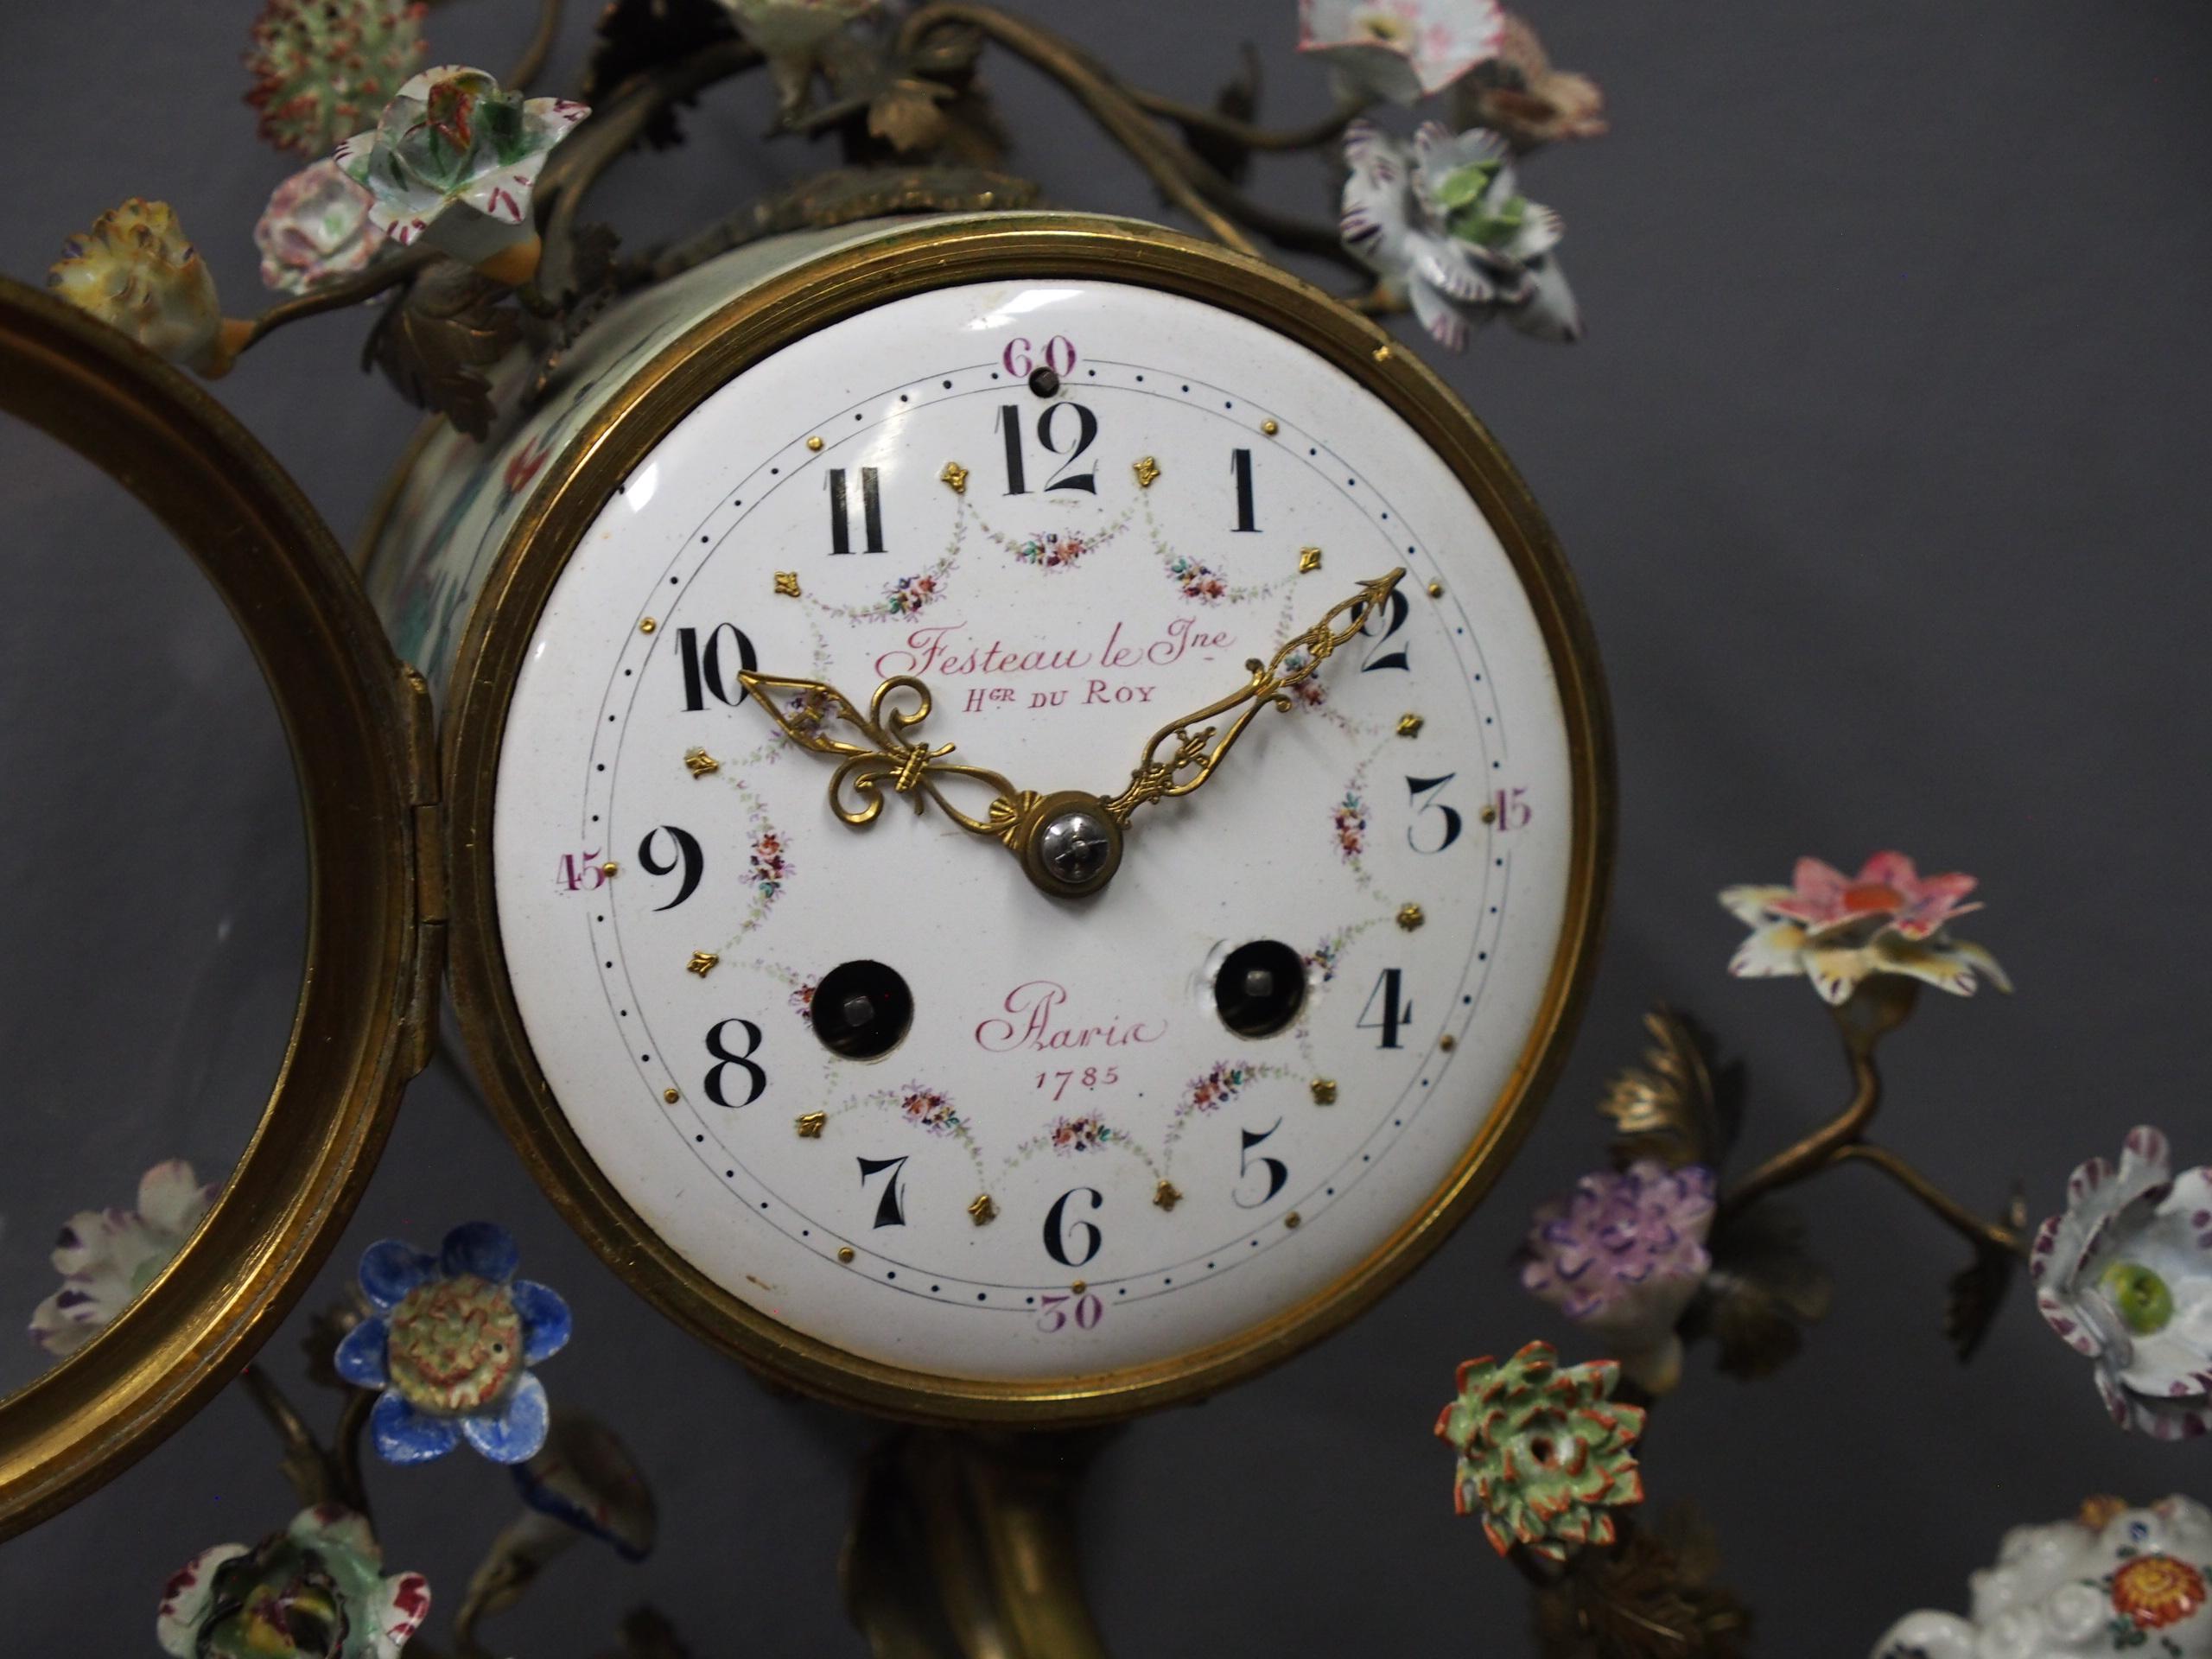 French gilded brass and porcelain mantel clock. With Chinese motifs, painted Arabic numerals and a makers or retailers name to the face of ‘Festeau le Jne, HGR DU ROY… Paris 1785’. To the back is a pendulum with a sunburst, cherub face and it has